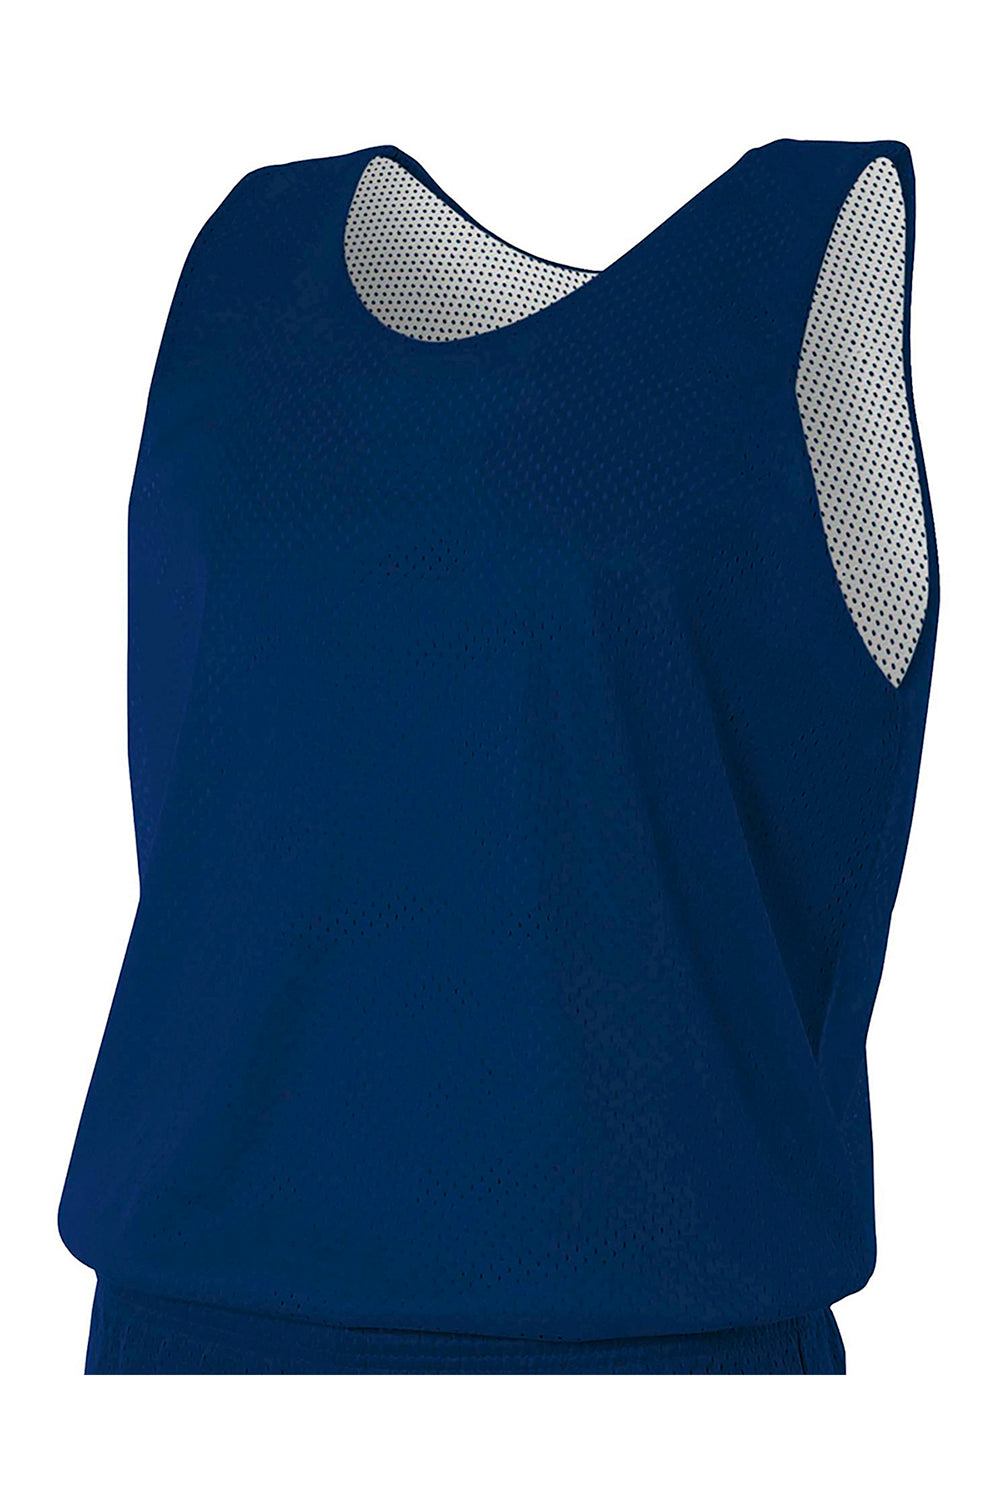 A4 NF1270 Mens Reversible Mesh Moisture Wicking Tank Top Navy Blue Flat Front